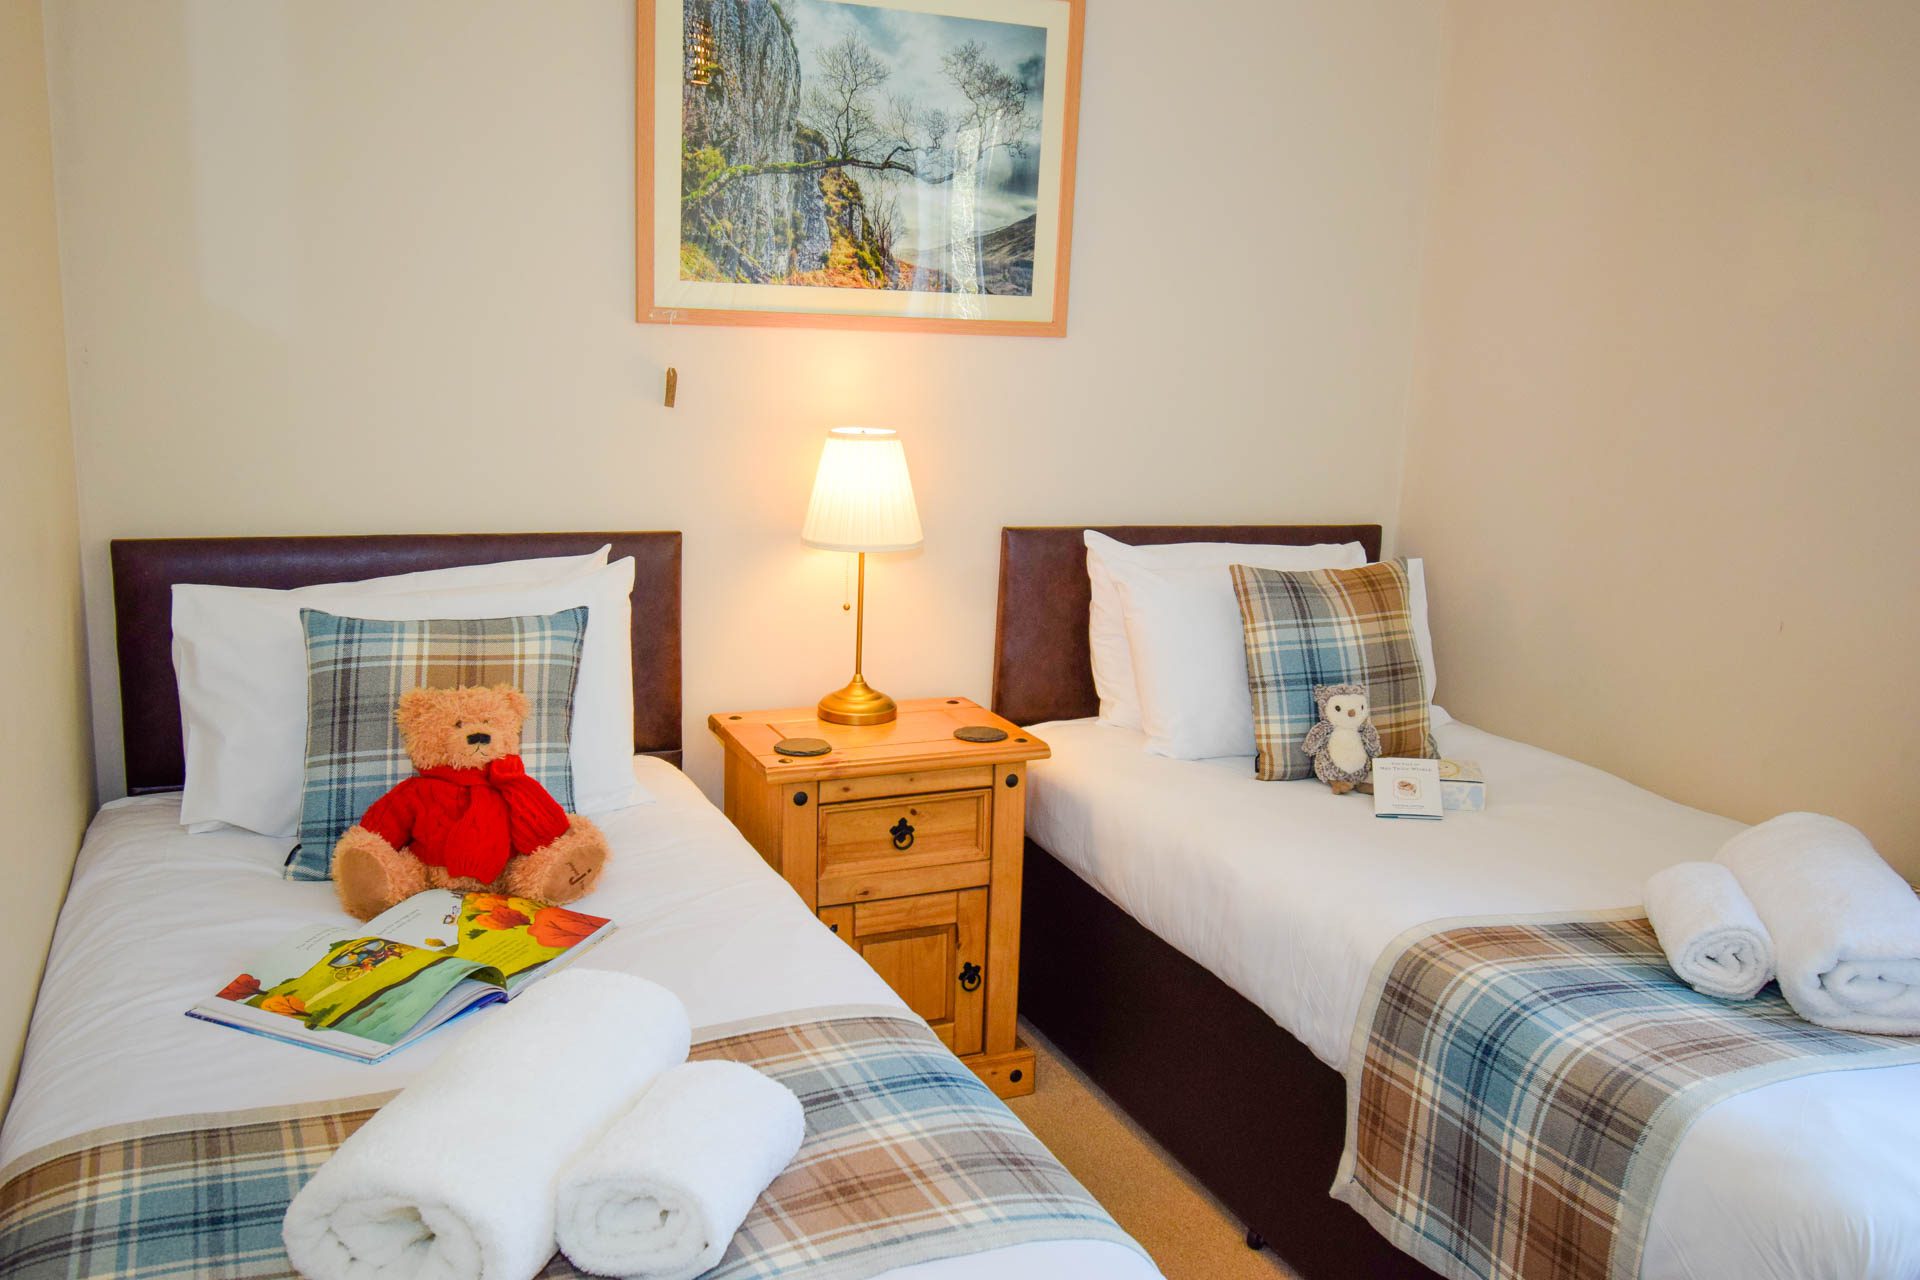 Birchbrae Highland Lodges offers family friendly self-catering accommodation near Glencoe & Fort William